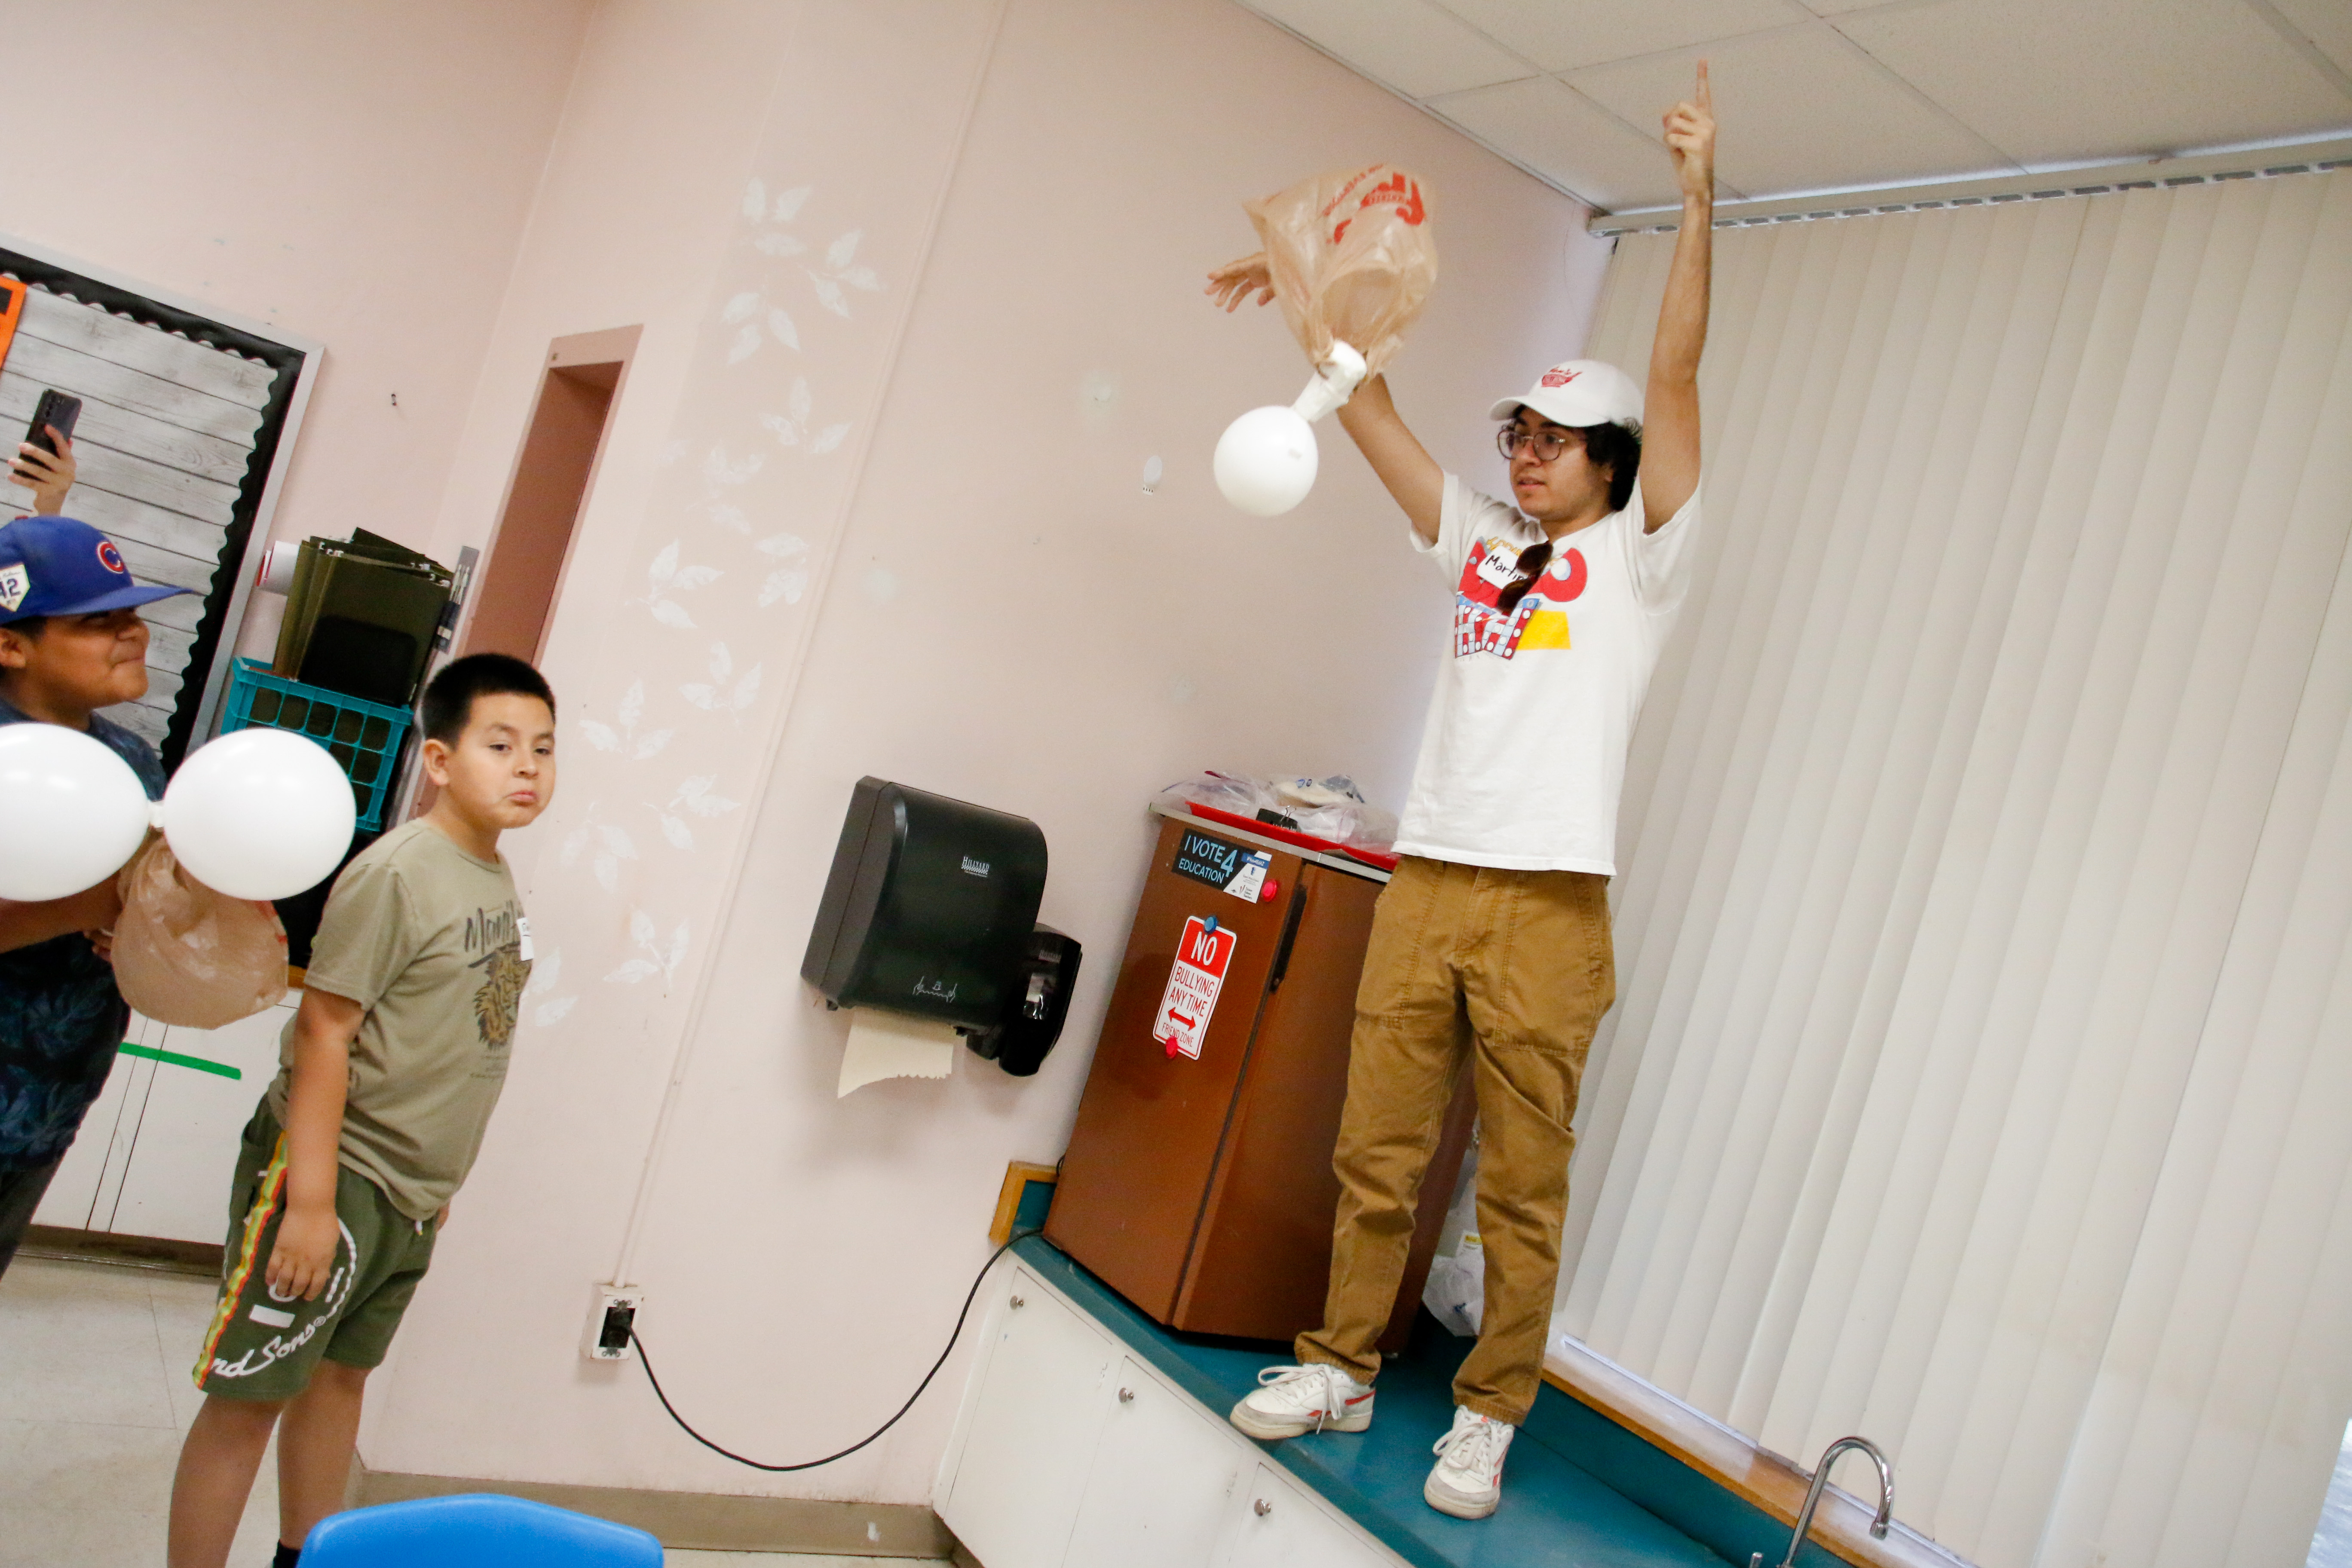 A boy in a white hat and shirt stands on a counter to drop his egg with a balloon and grocery bag